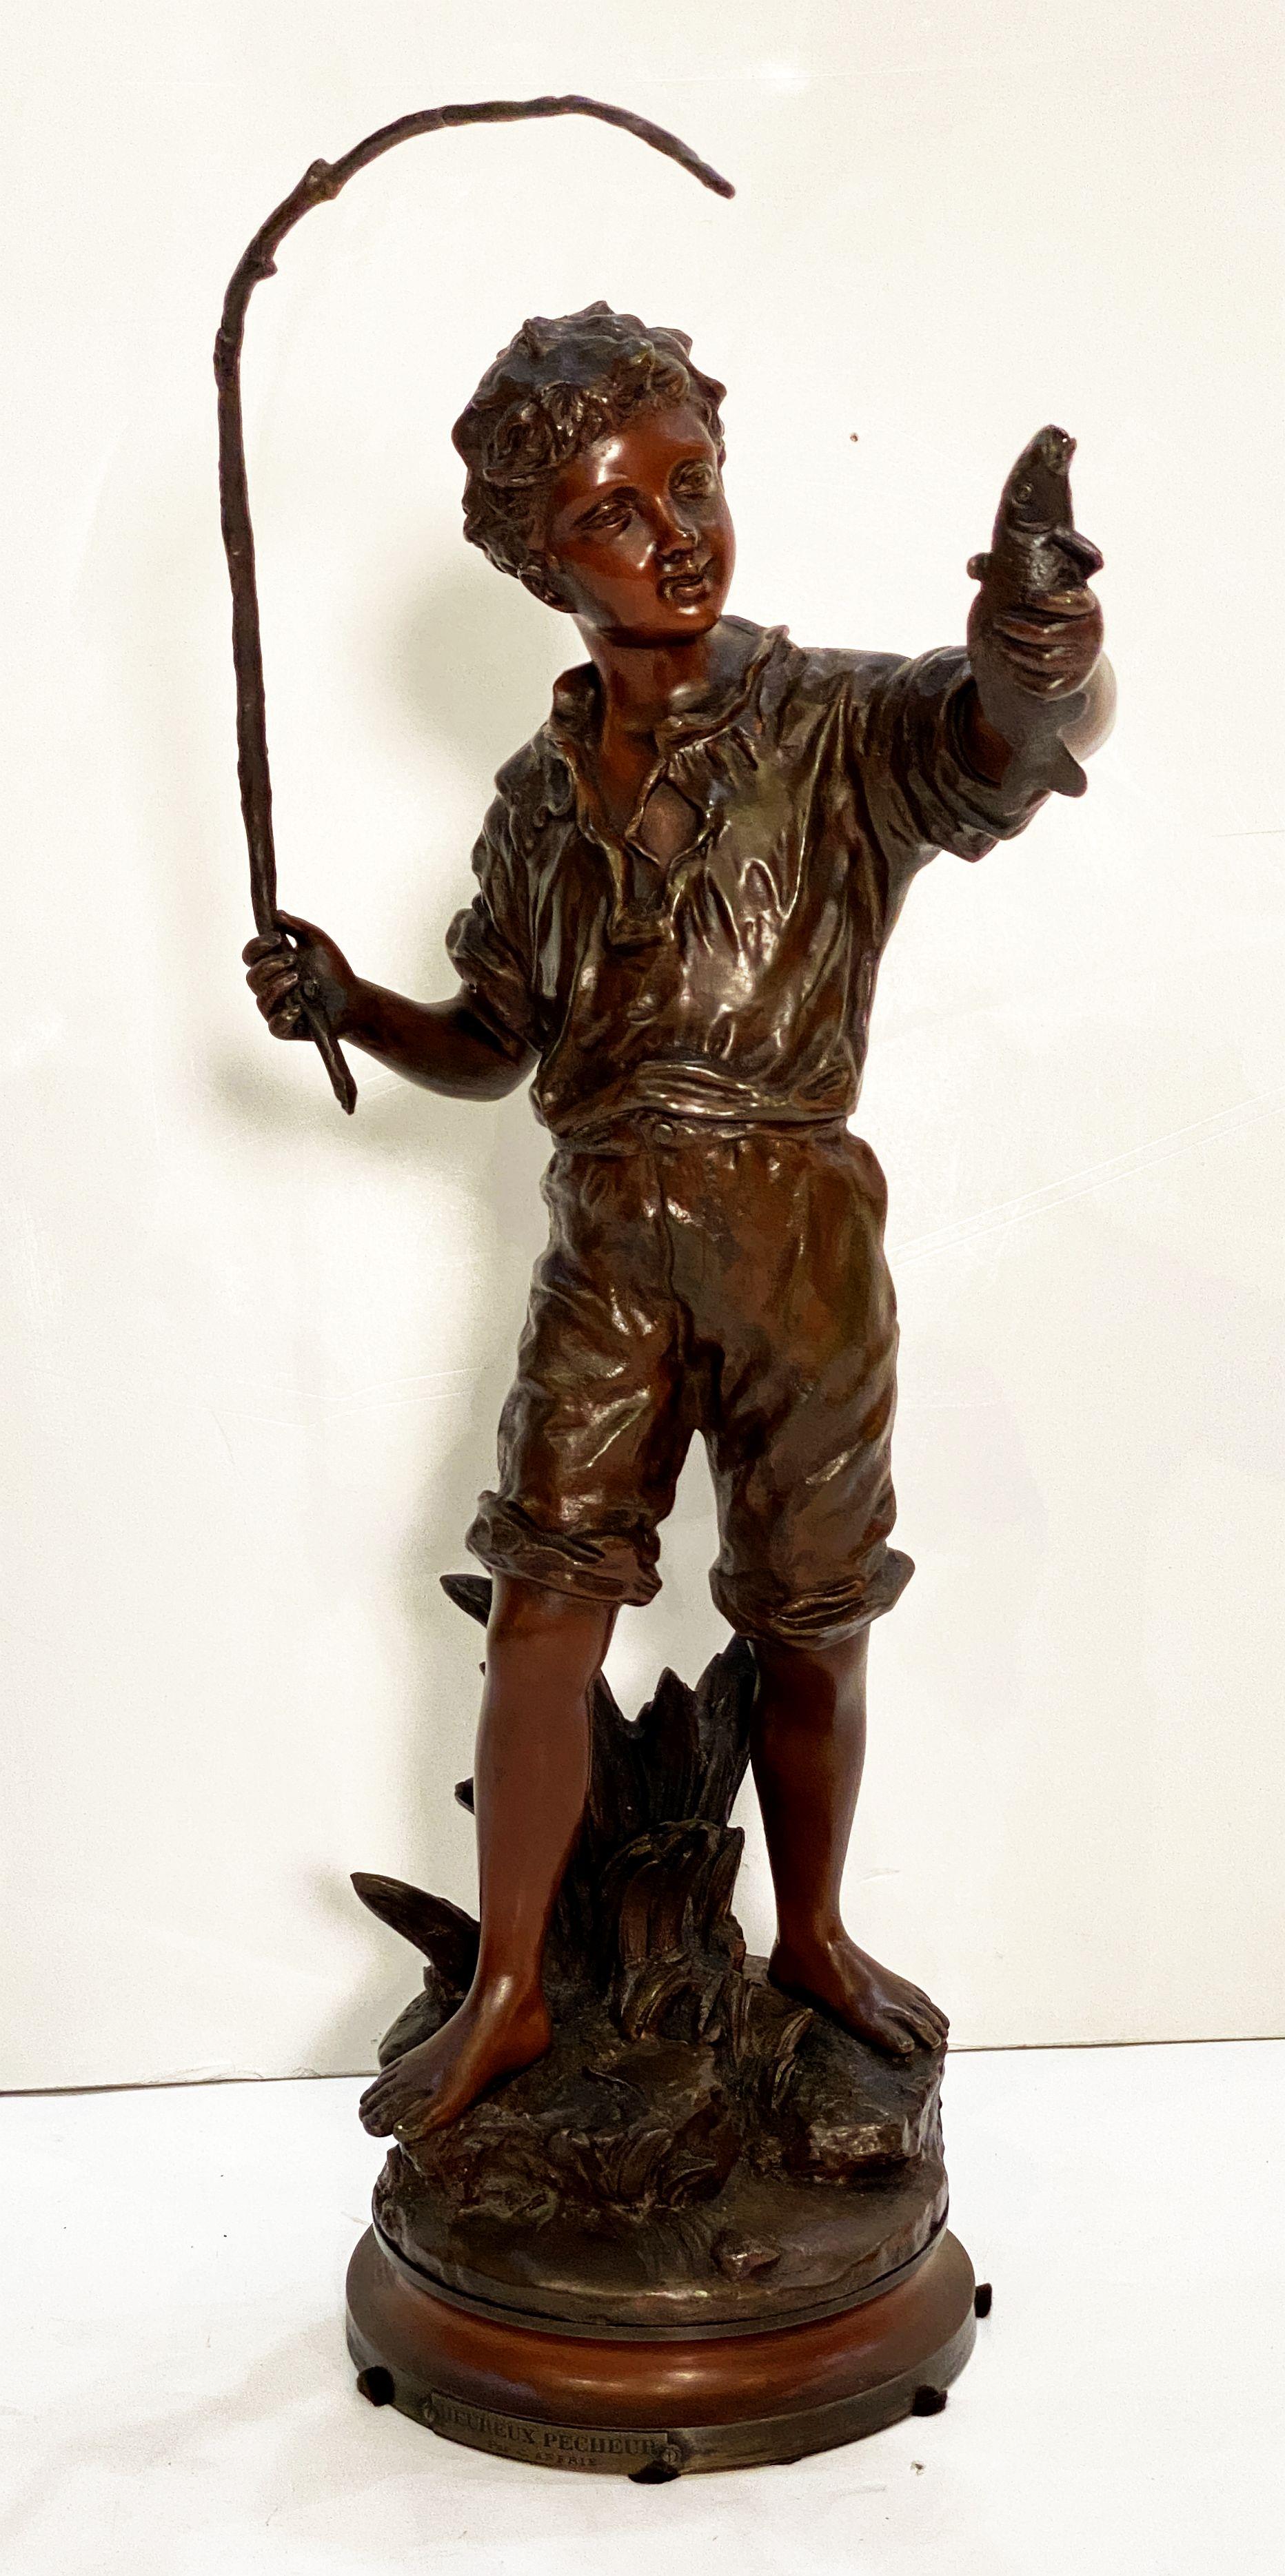 French Heureux Pêcheur or Happy Fisherboy Bronze Sculptural Figure by Charles Anfrie 